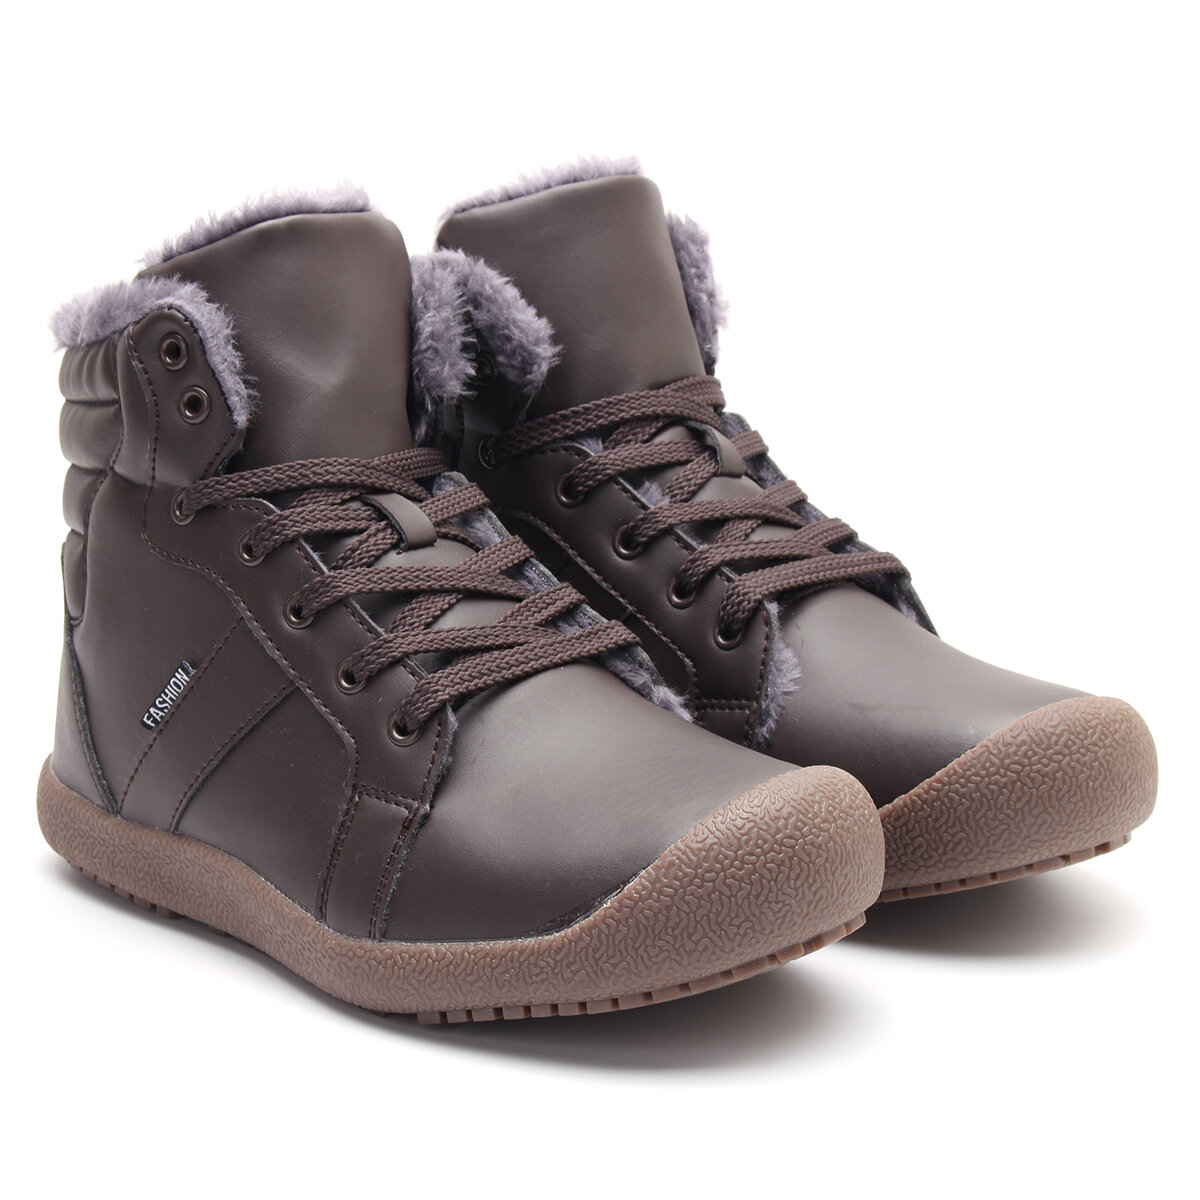 Men's Winter Warm Snow Boot Waterproof PU High Top Lace Up Comfy Sneaker Shoes